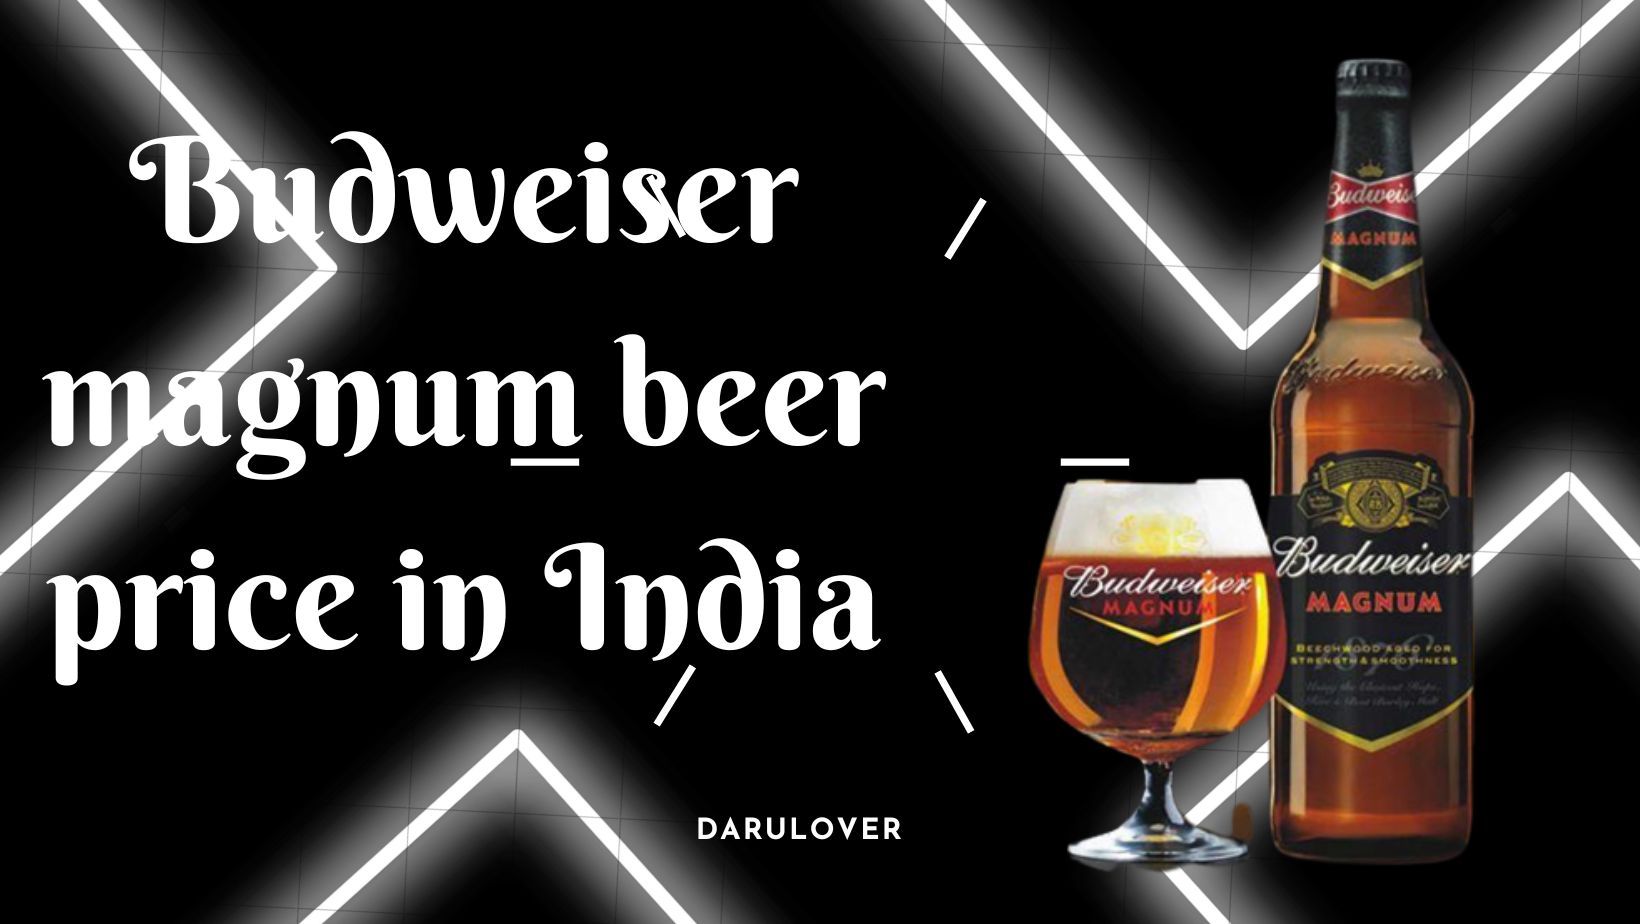 Budweiser magnum beer price in India